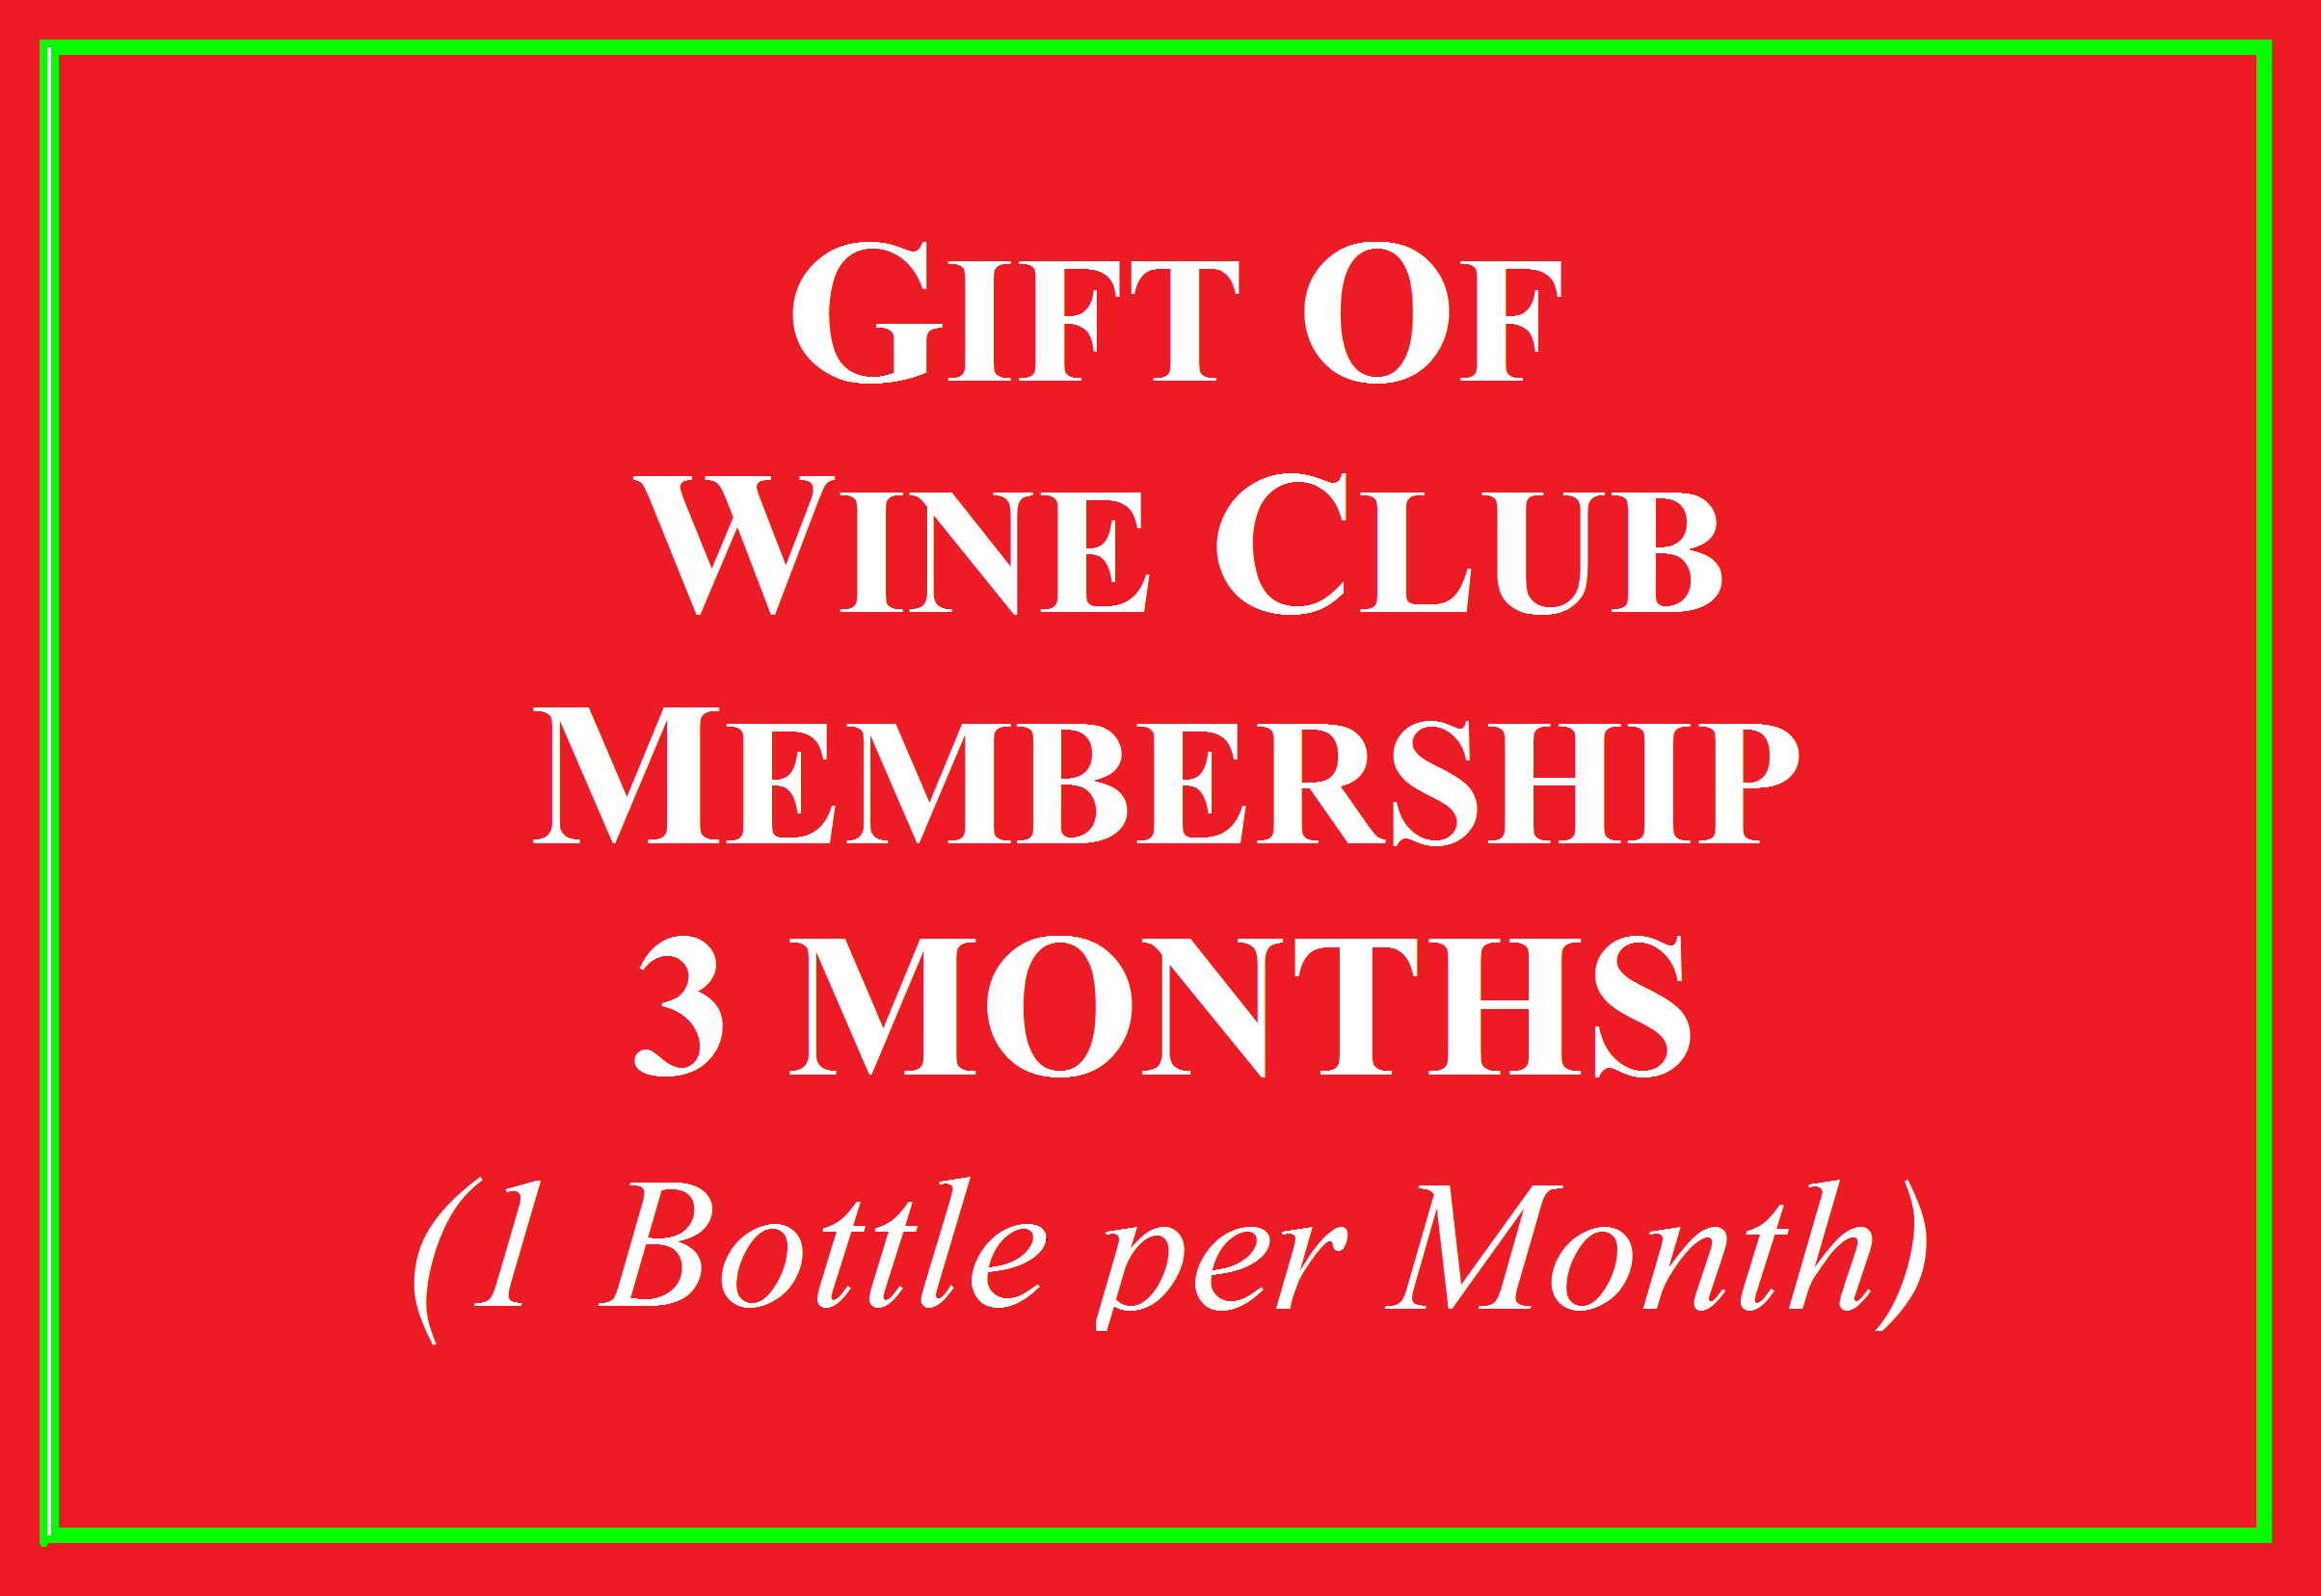 Wine Club Gift for 3 Months 1 Bottle